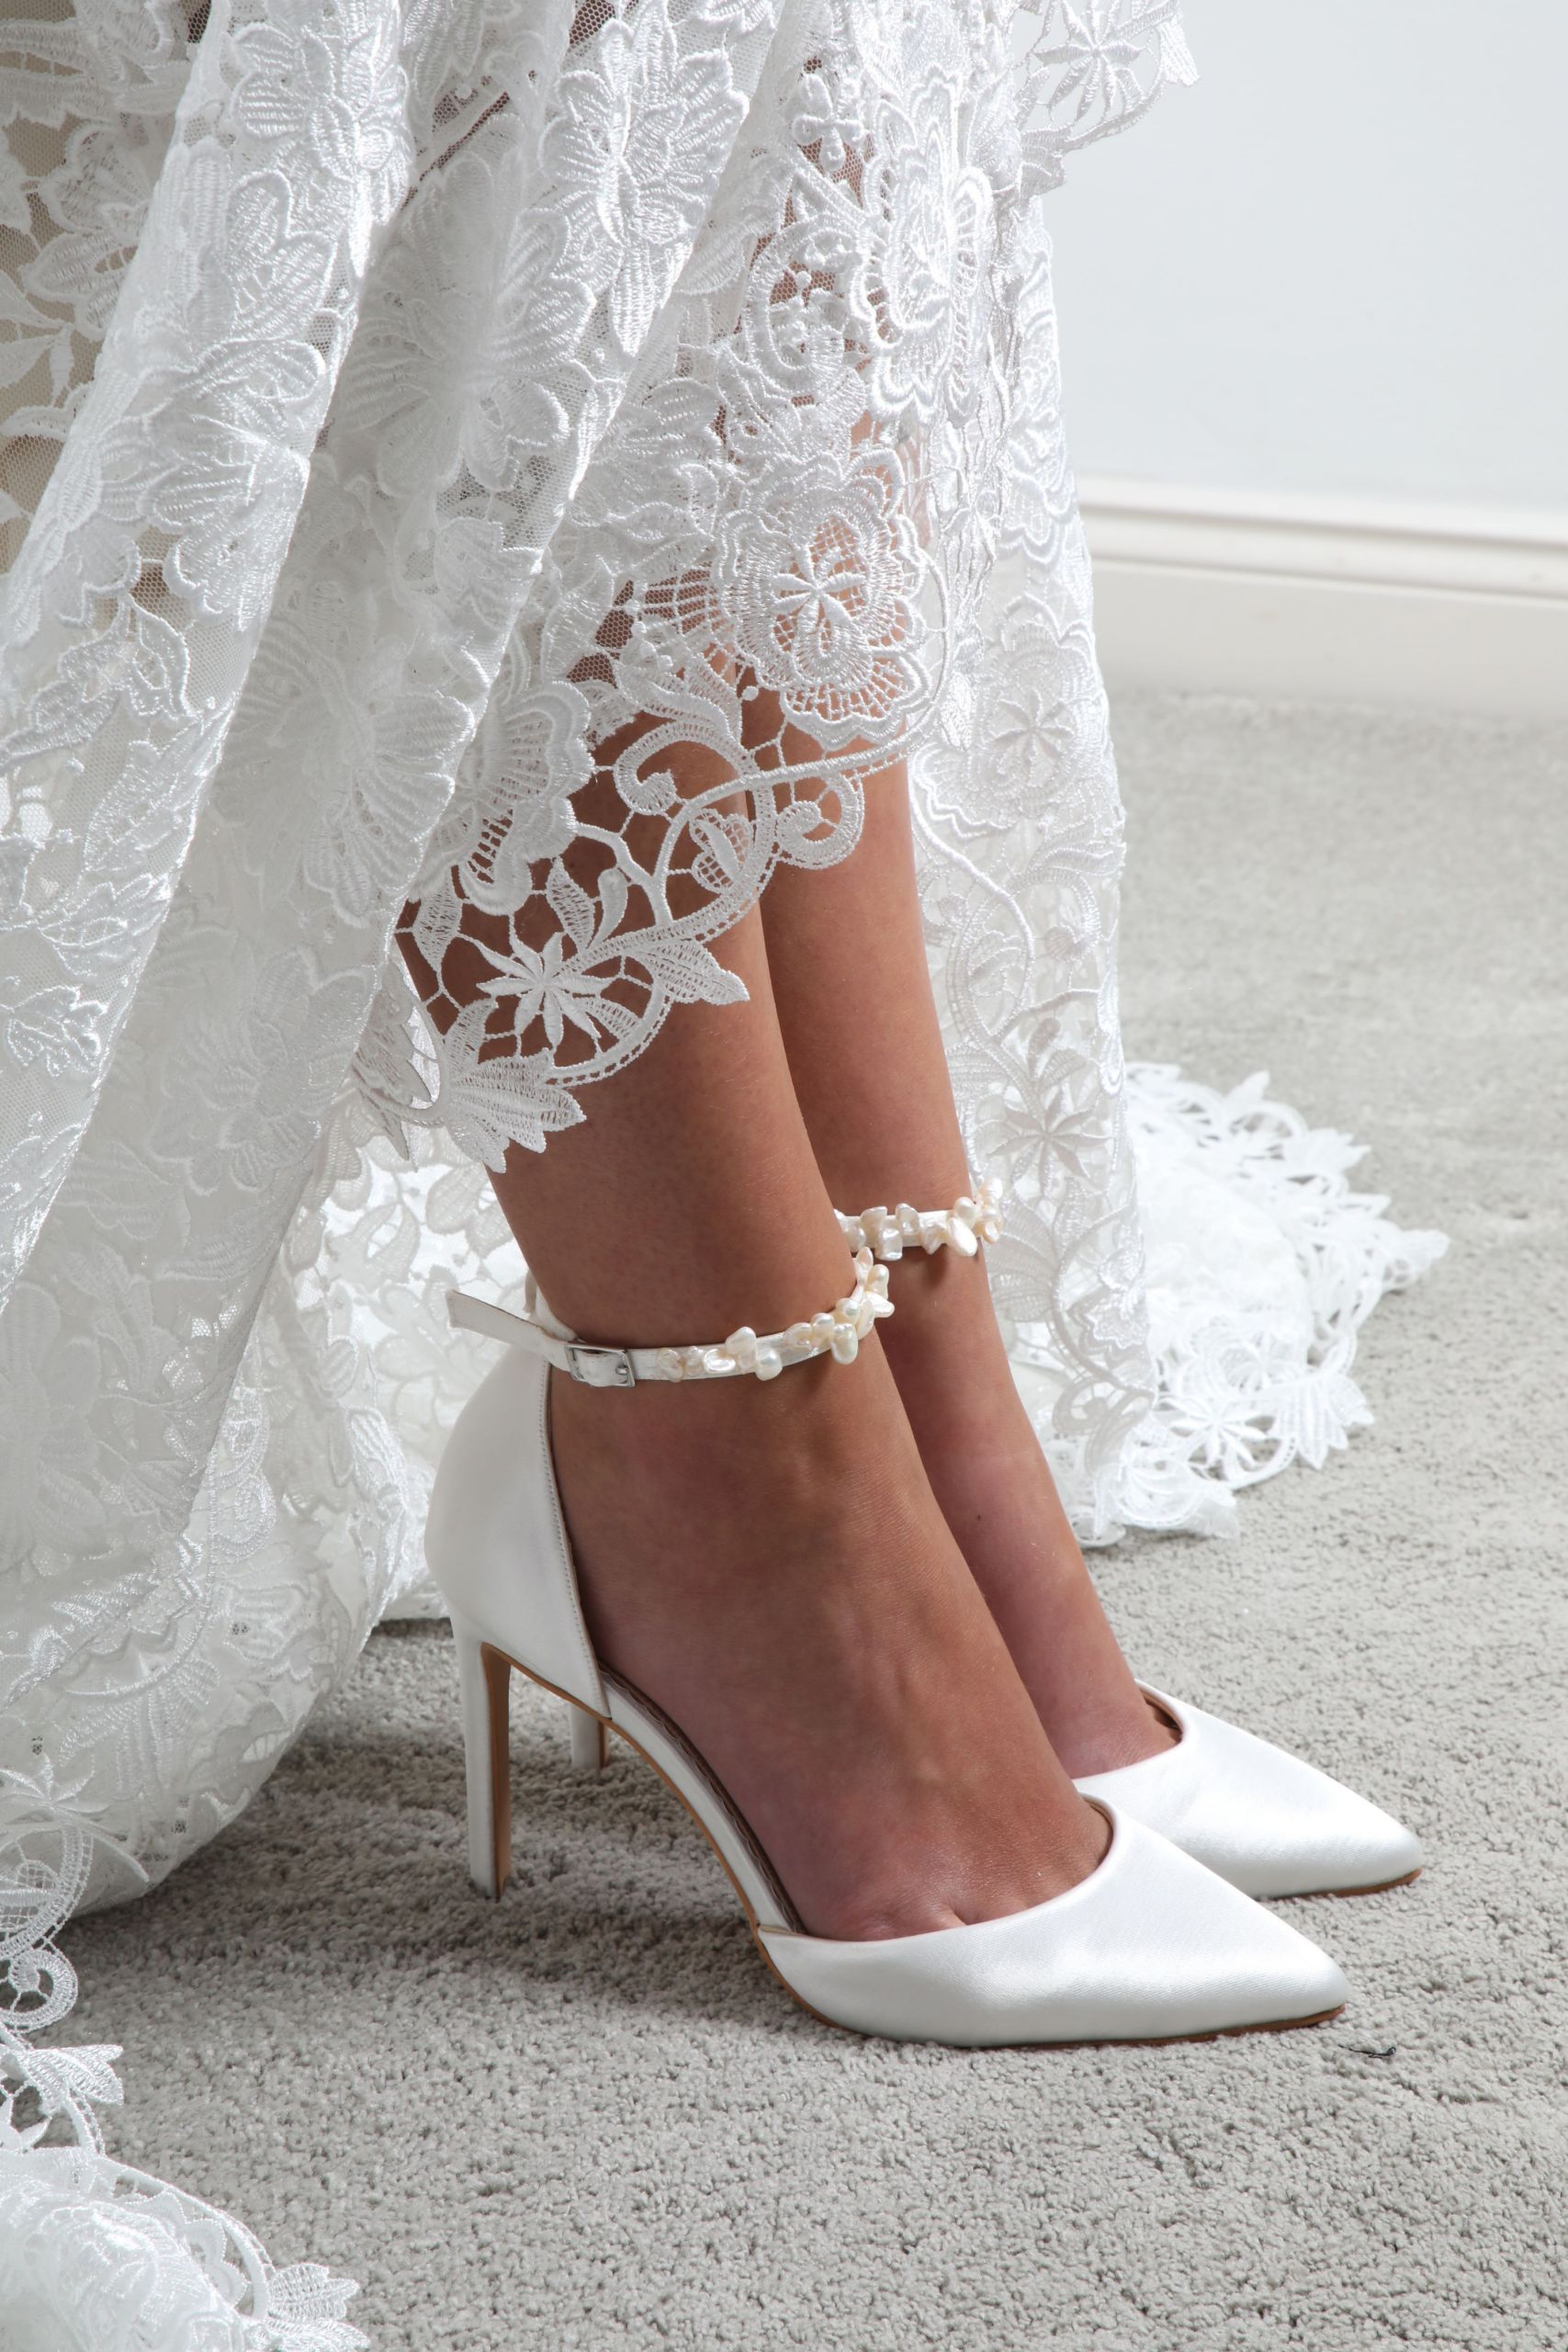 Beautiful Wedding Shoes
 Ella in 2020 With images